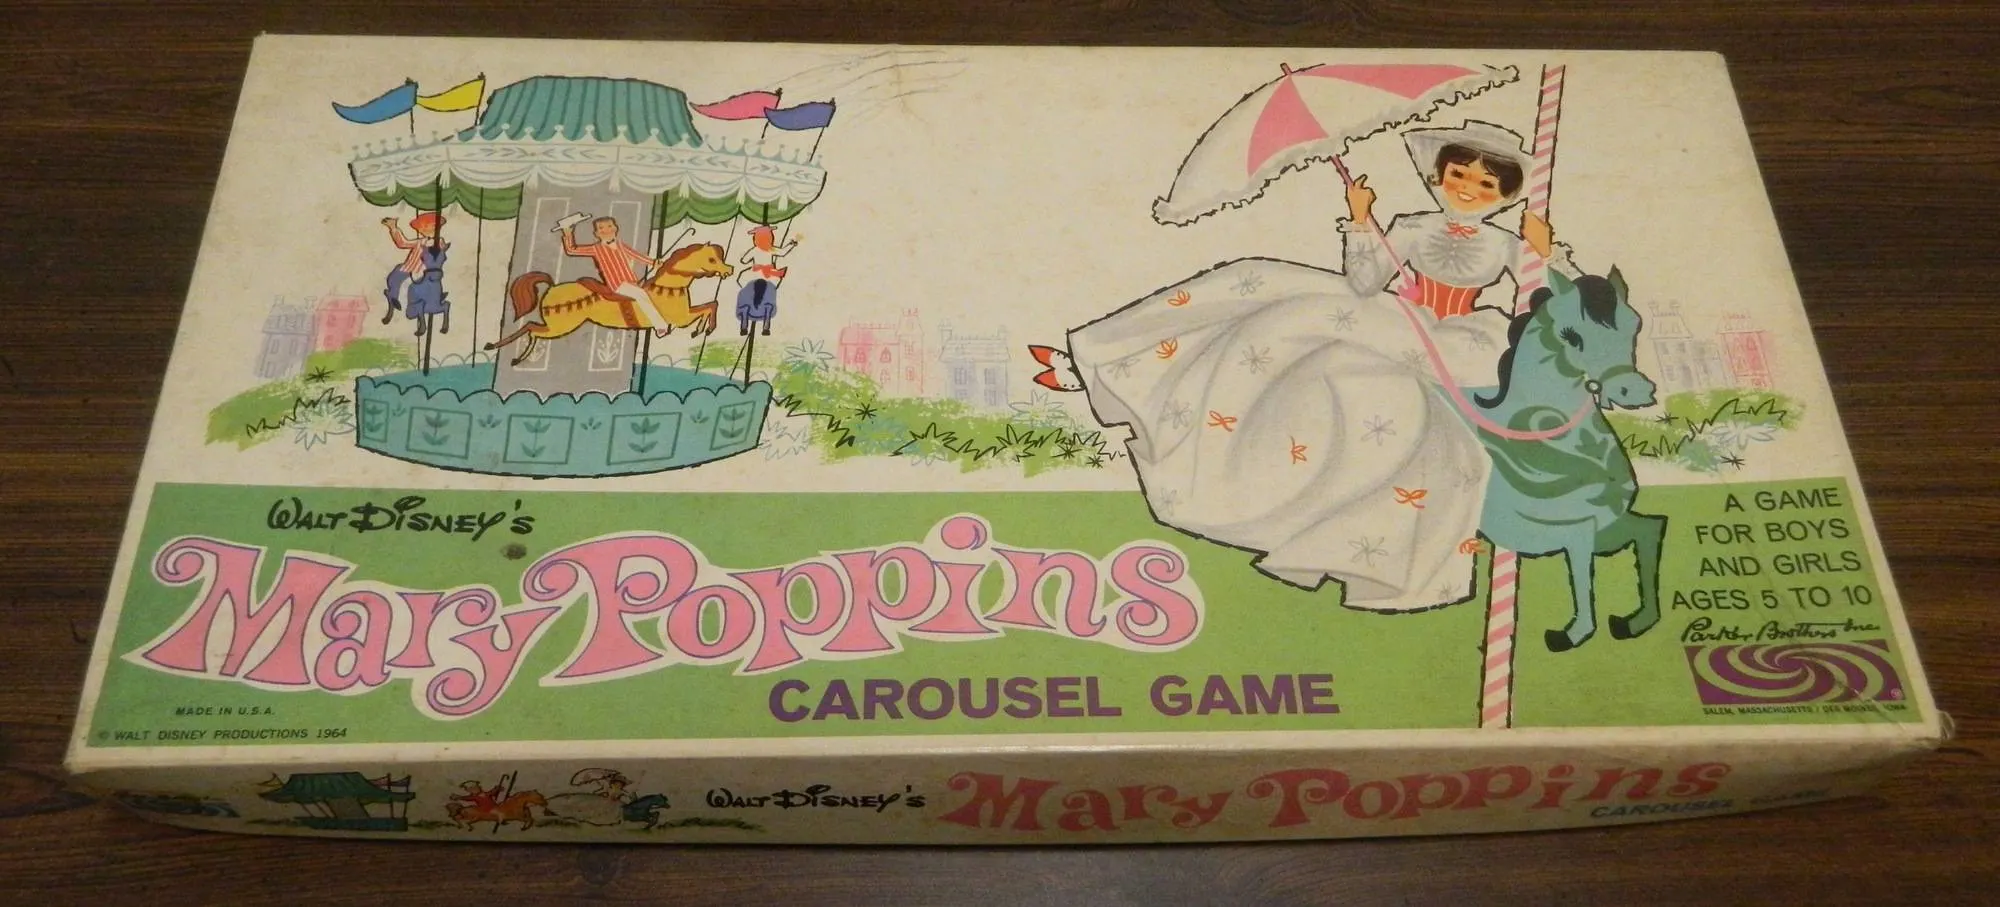 Box for Mary Poppins Carousel Game